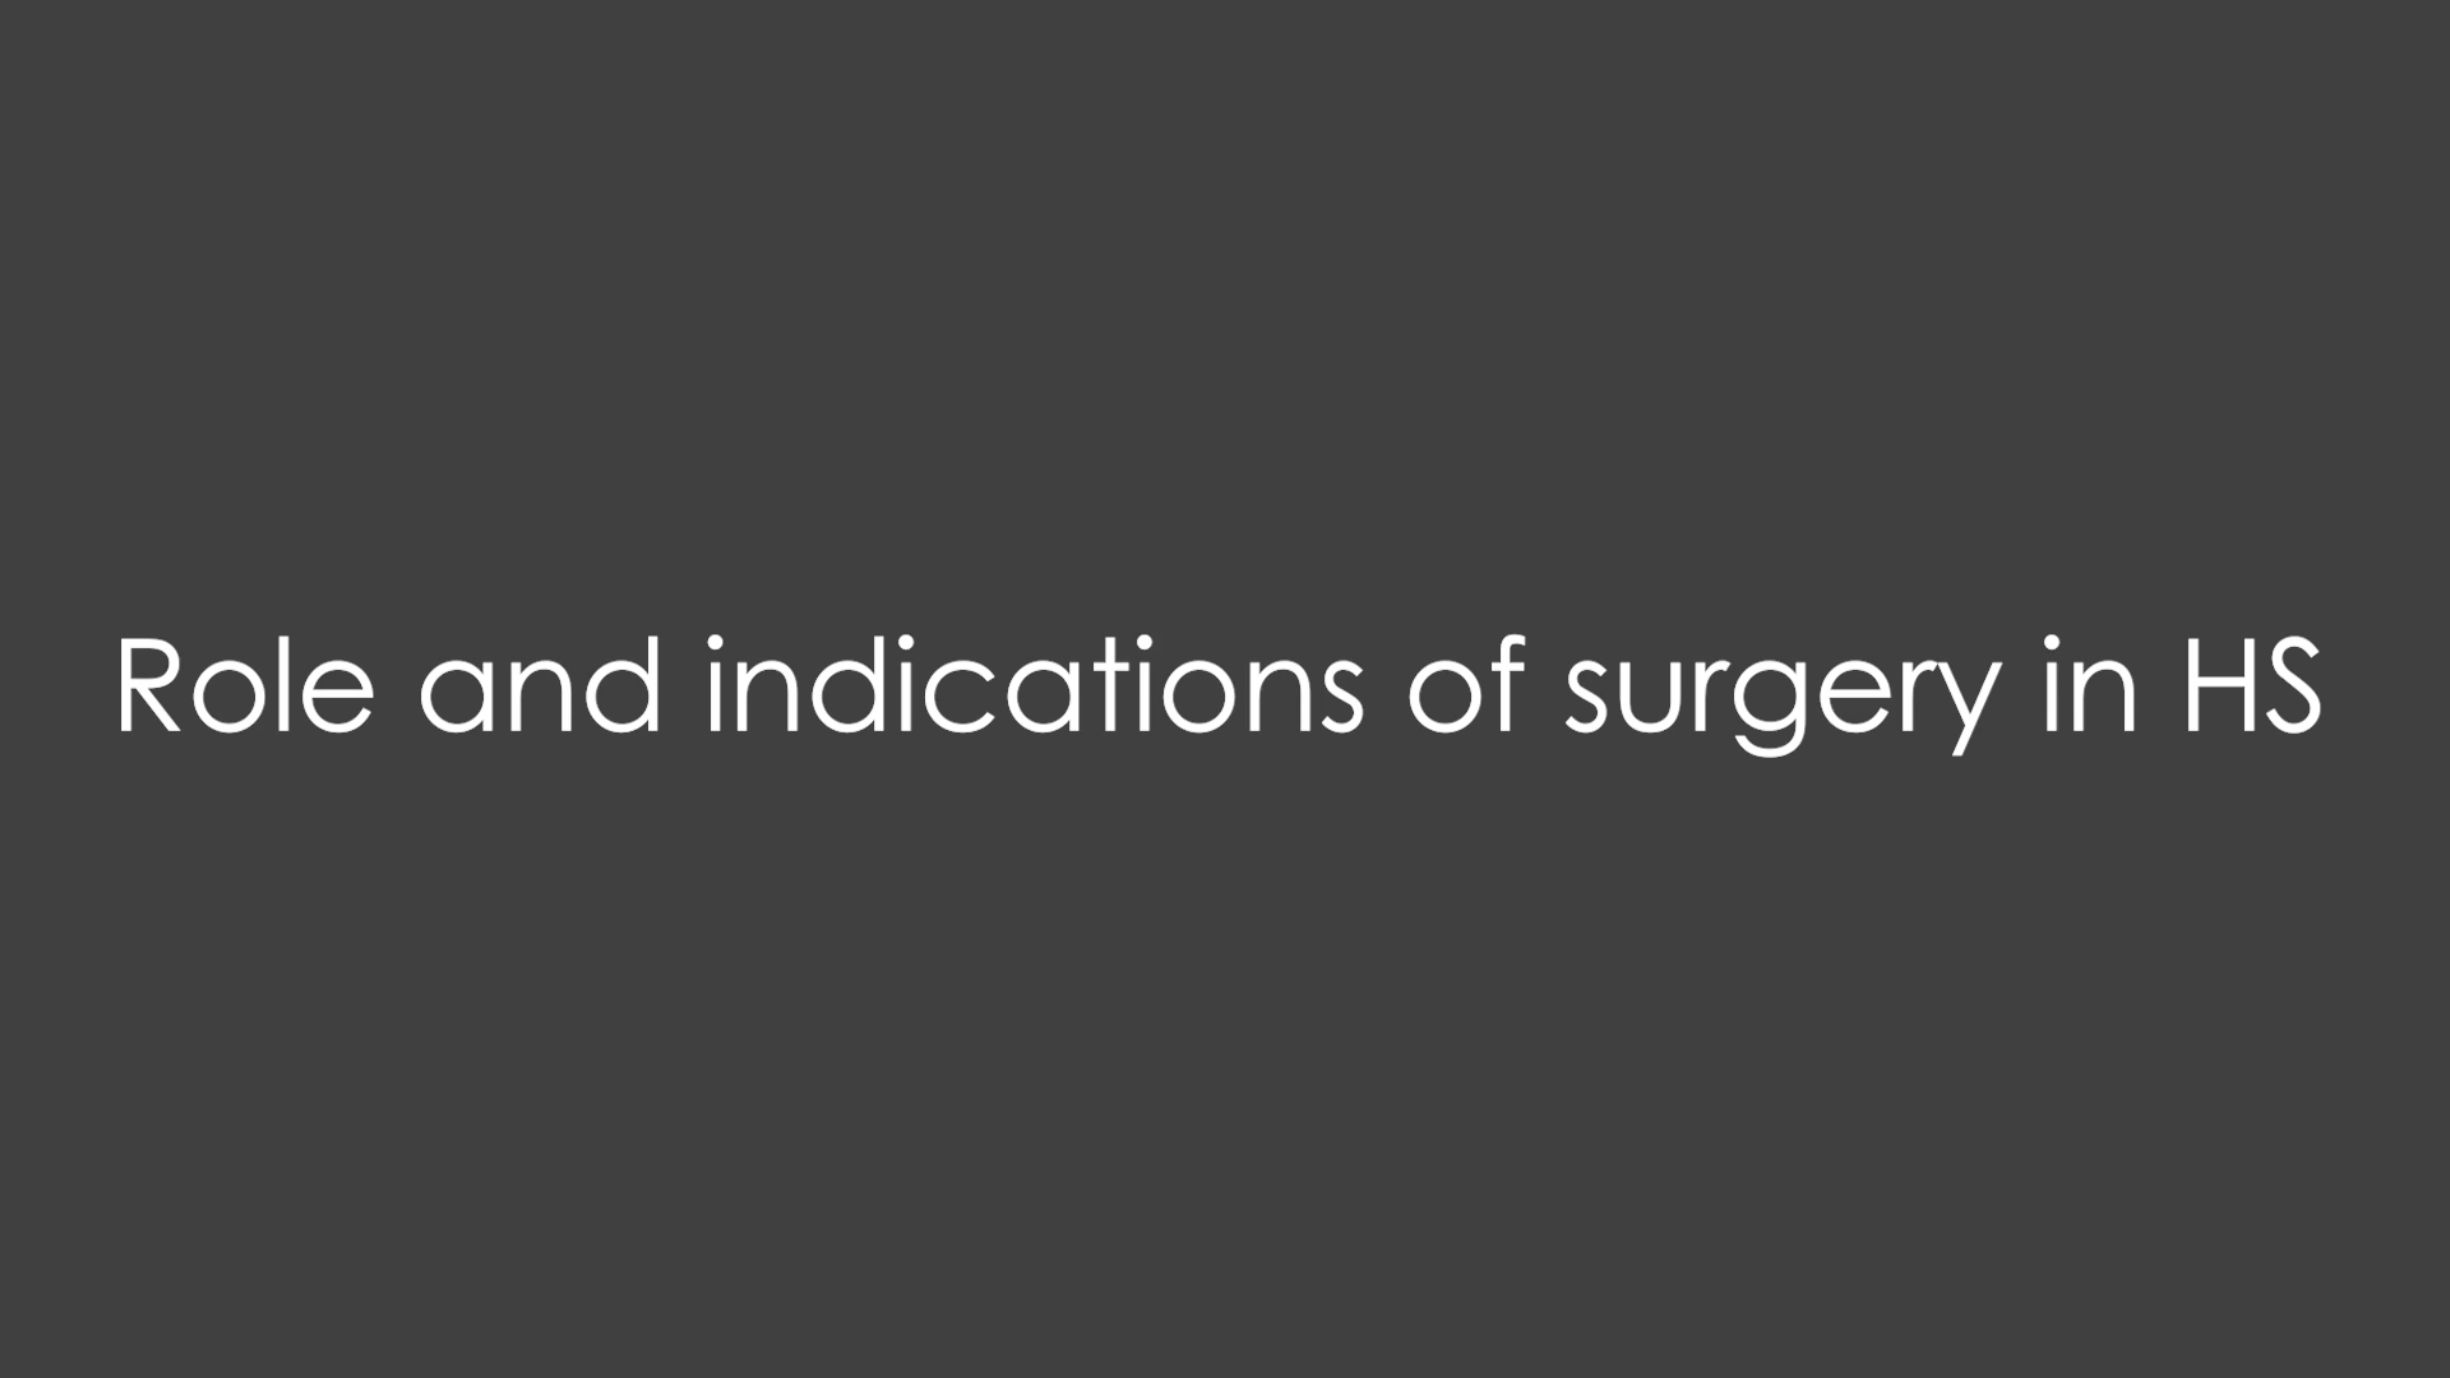 HS EADV 2022 - Role and indications of surgery in HS